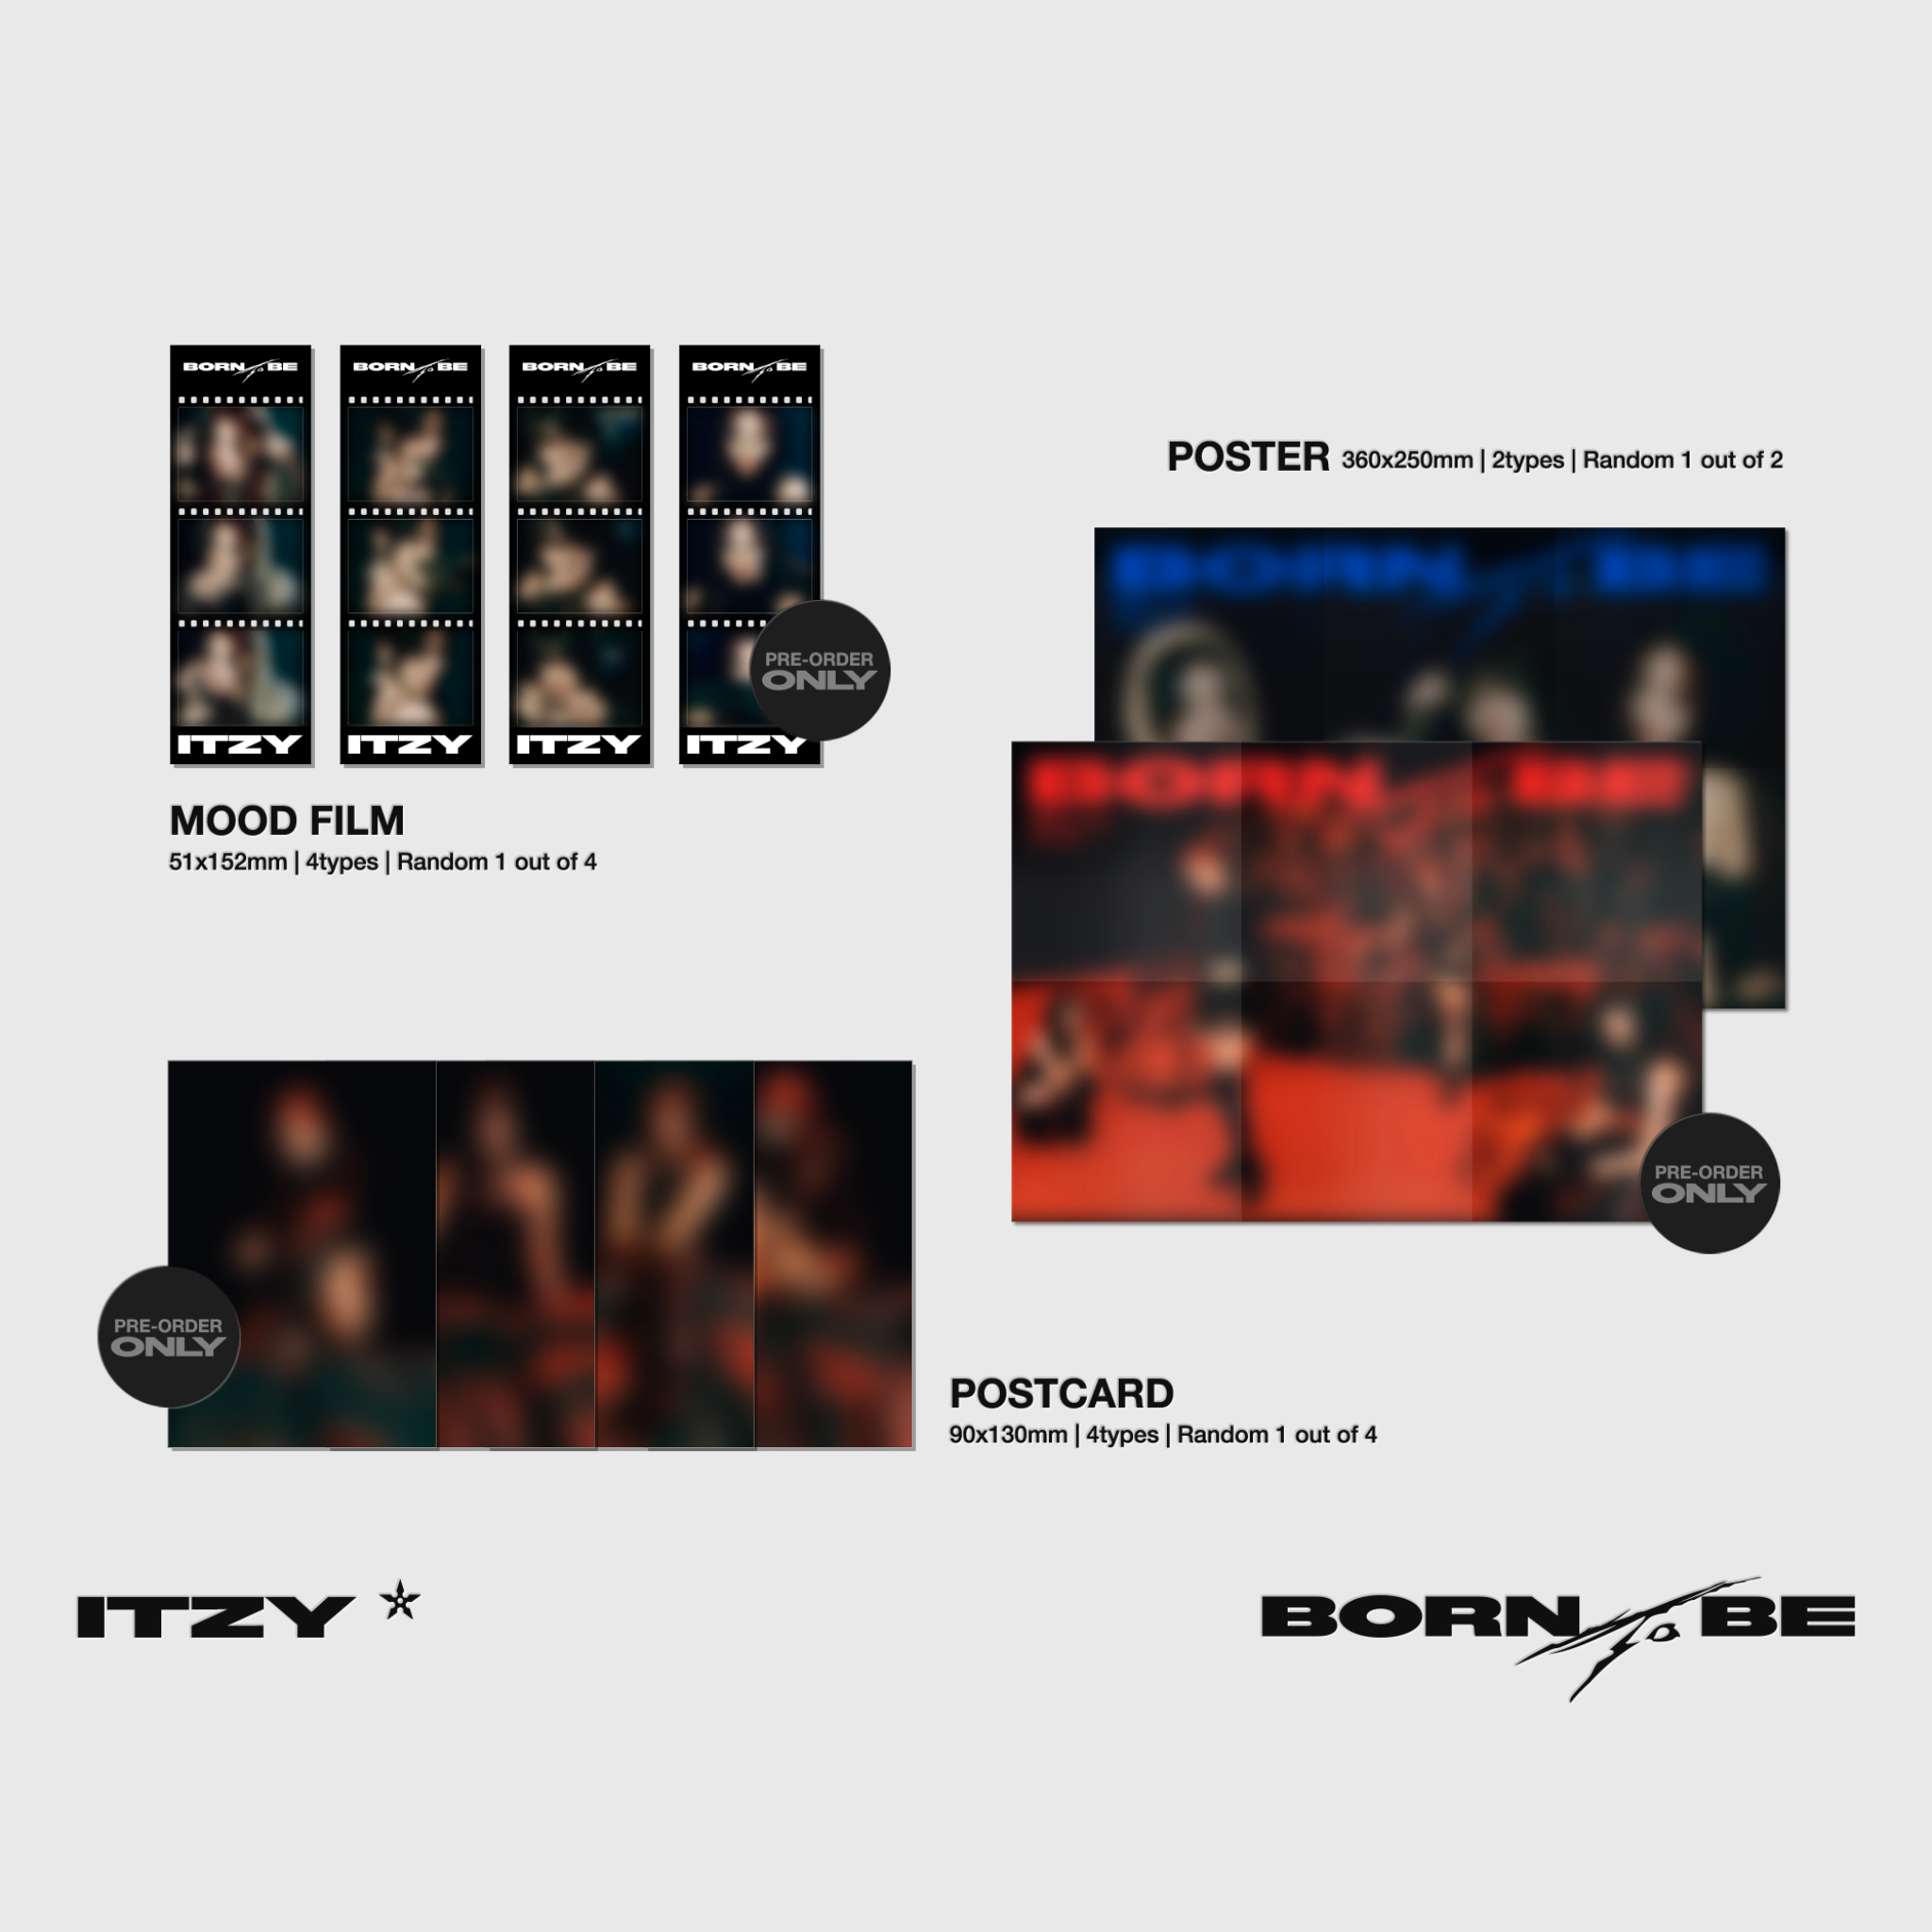 ITZY - BORN TO BE (LIMITED VER)